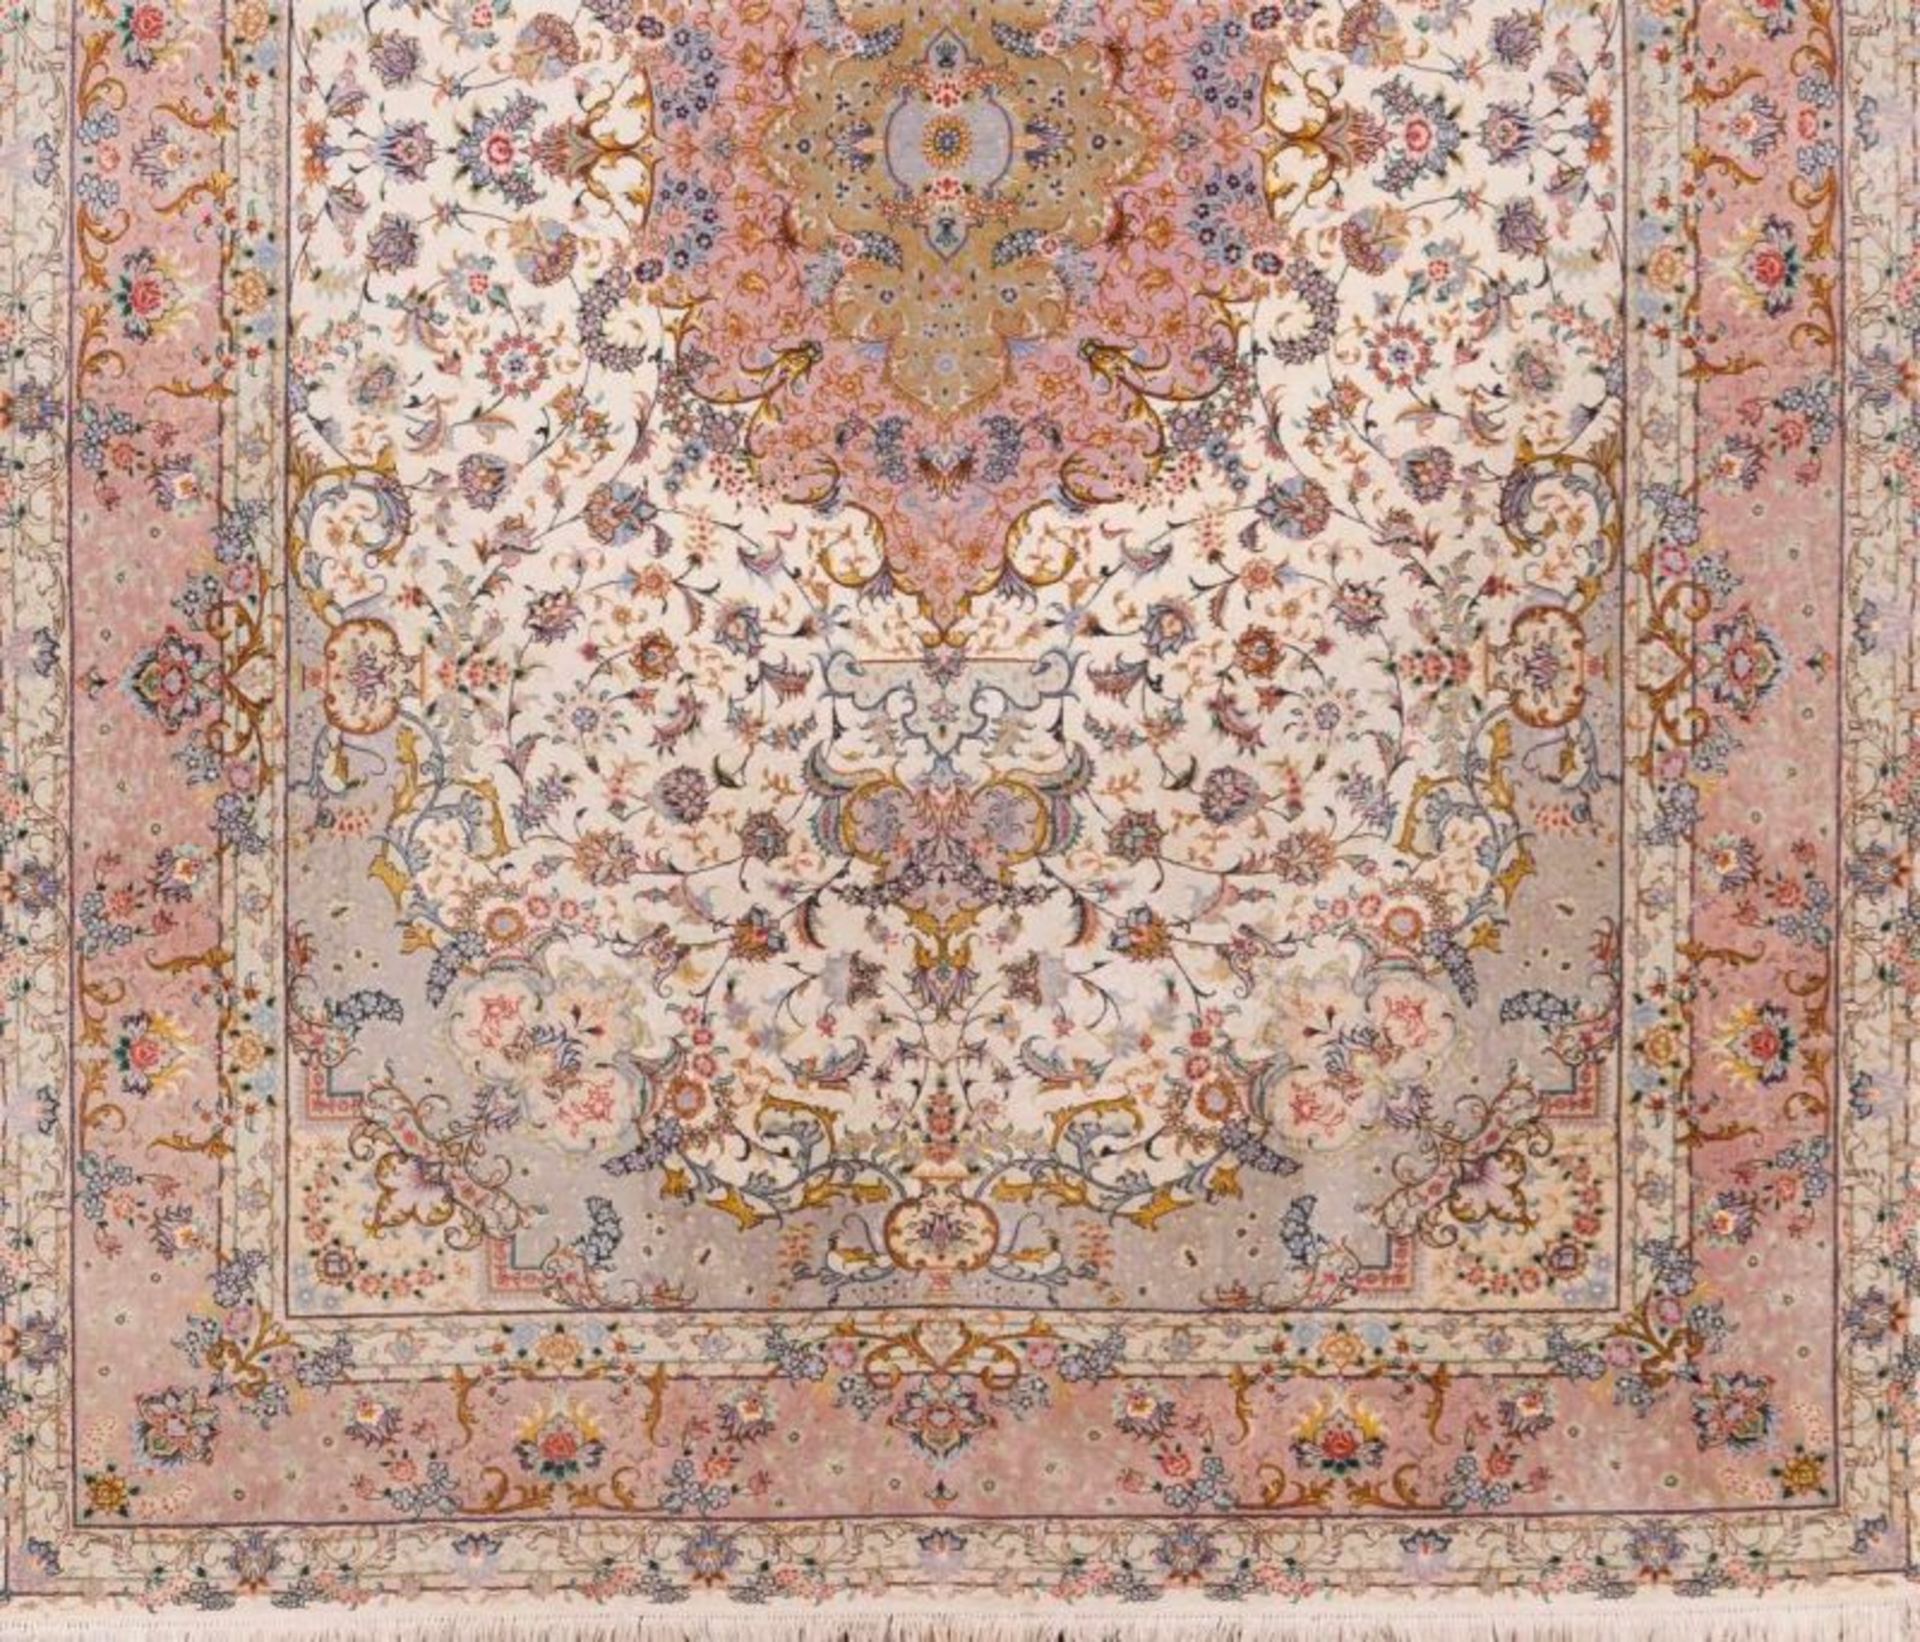 A Tabriz carpet, Iran Cotton, wool and silk Decorated with floral pattern in pink, beige, green and